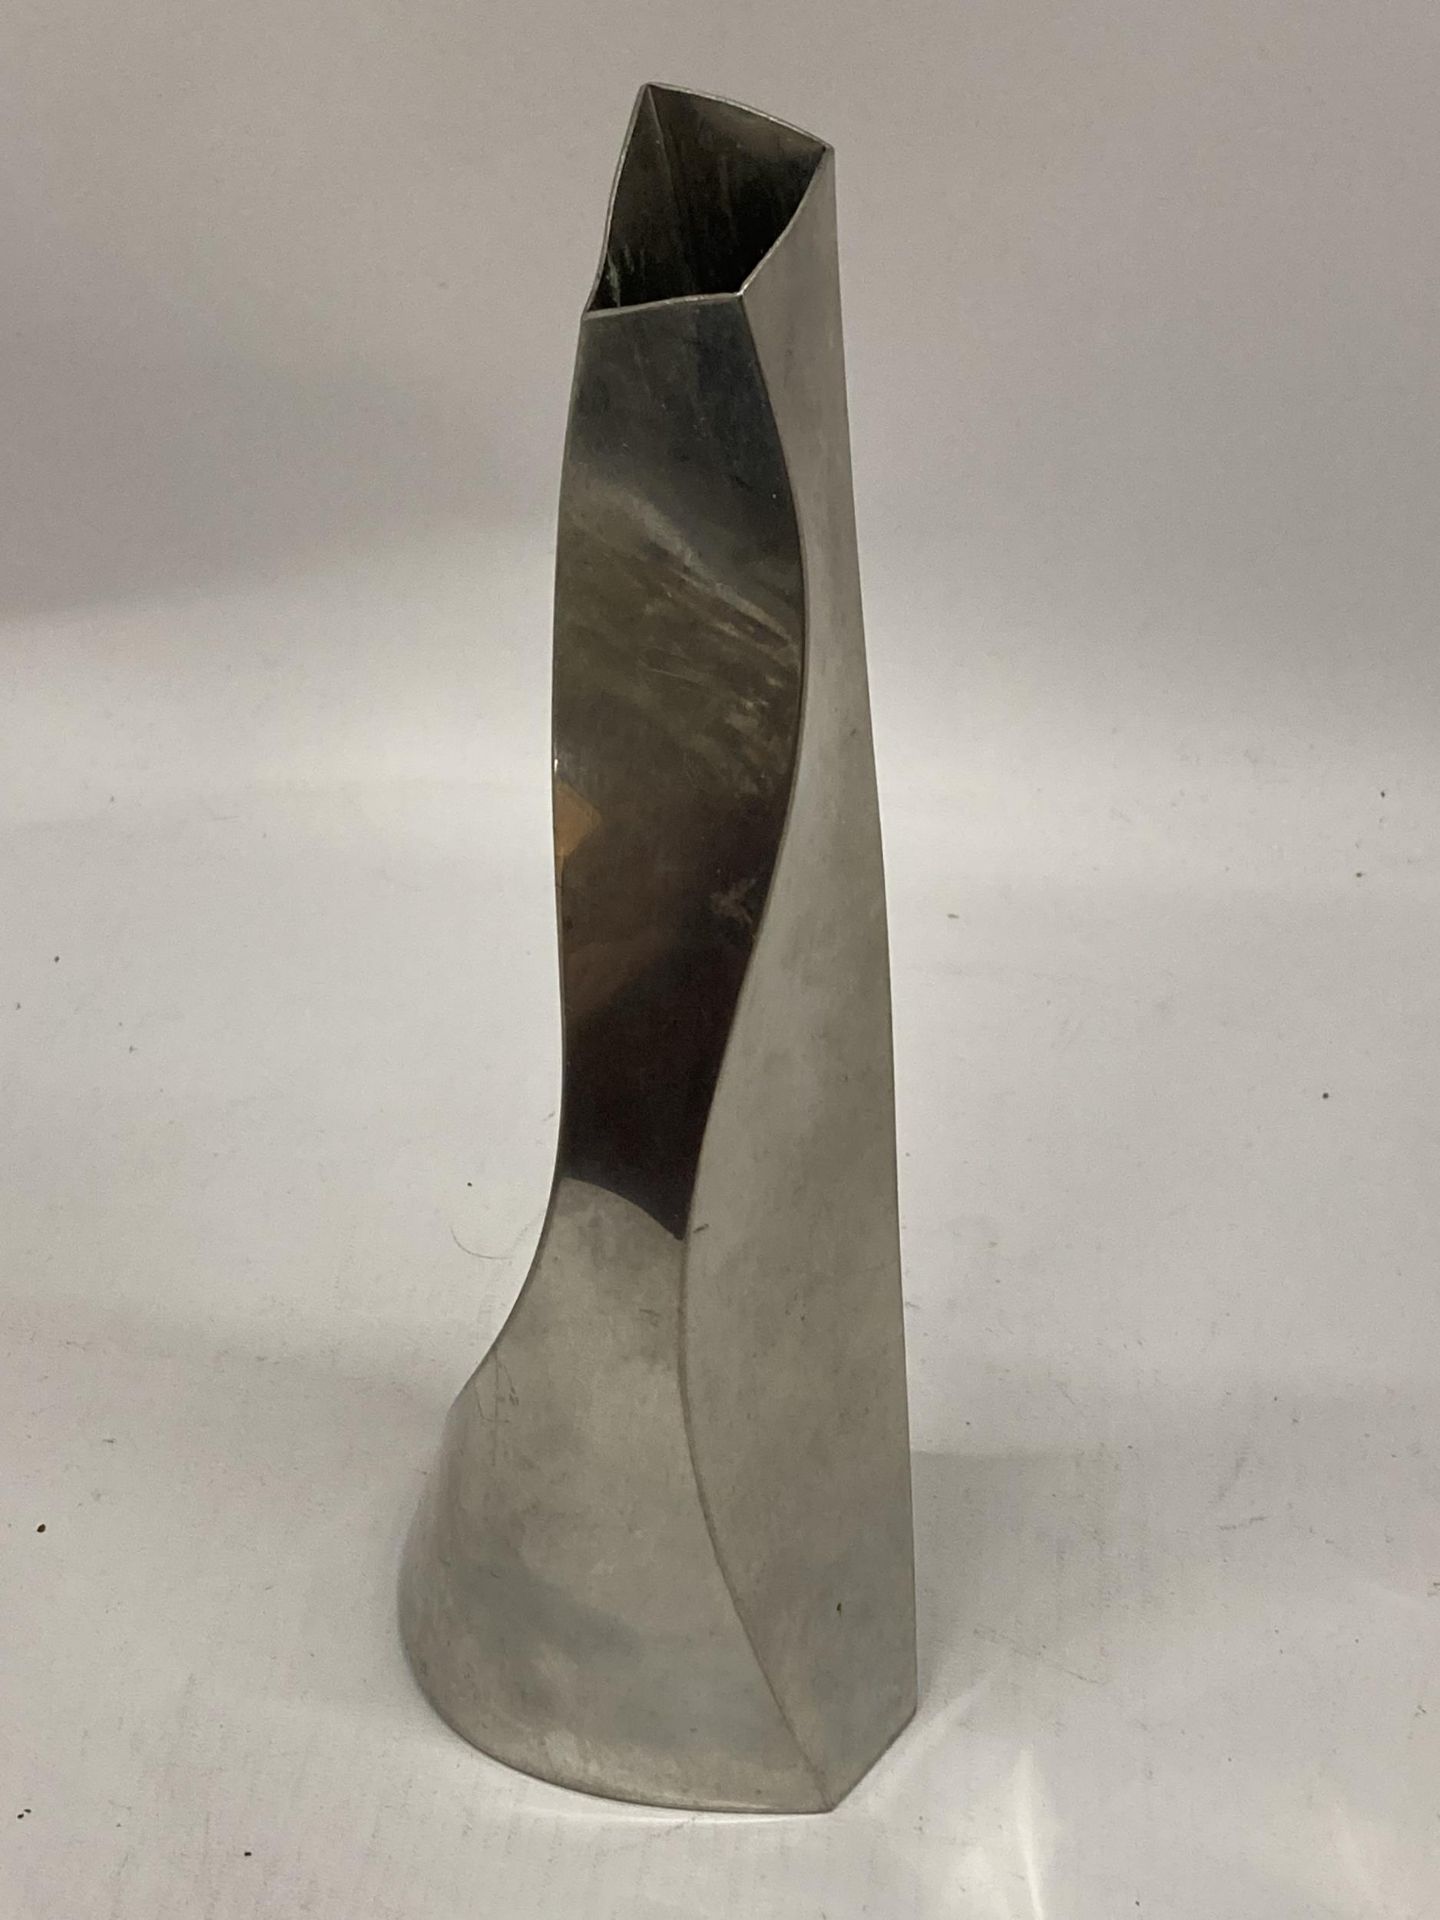 A CATHERINE TUTT, SHEFFIELD ABSTRACT DESIGN PEWTER TWIST VASE, HEIGHT 25CM, SIGNED TO BASE